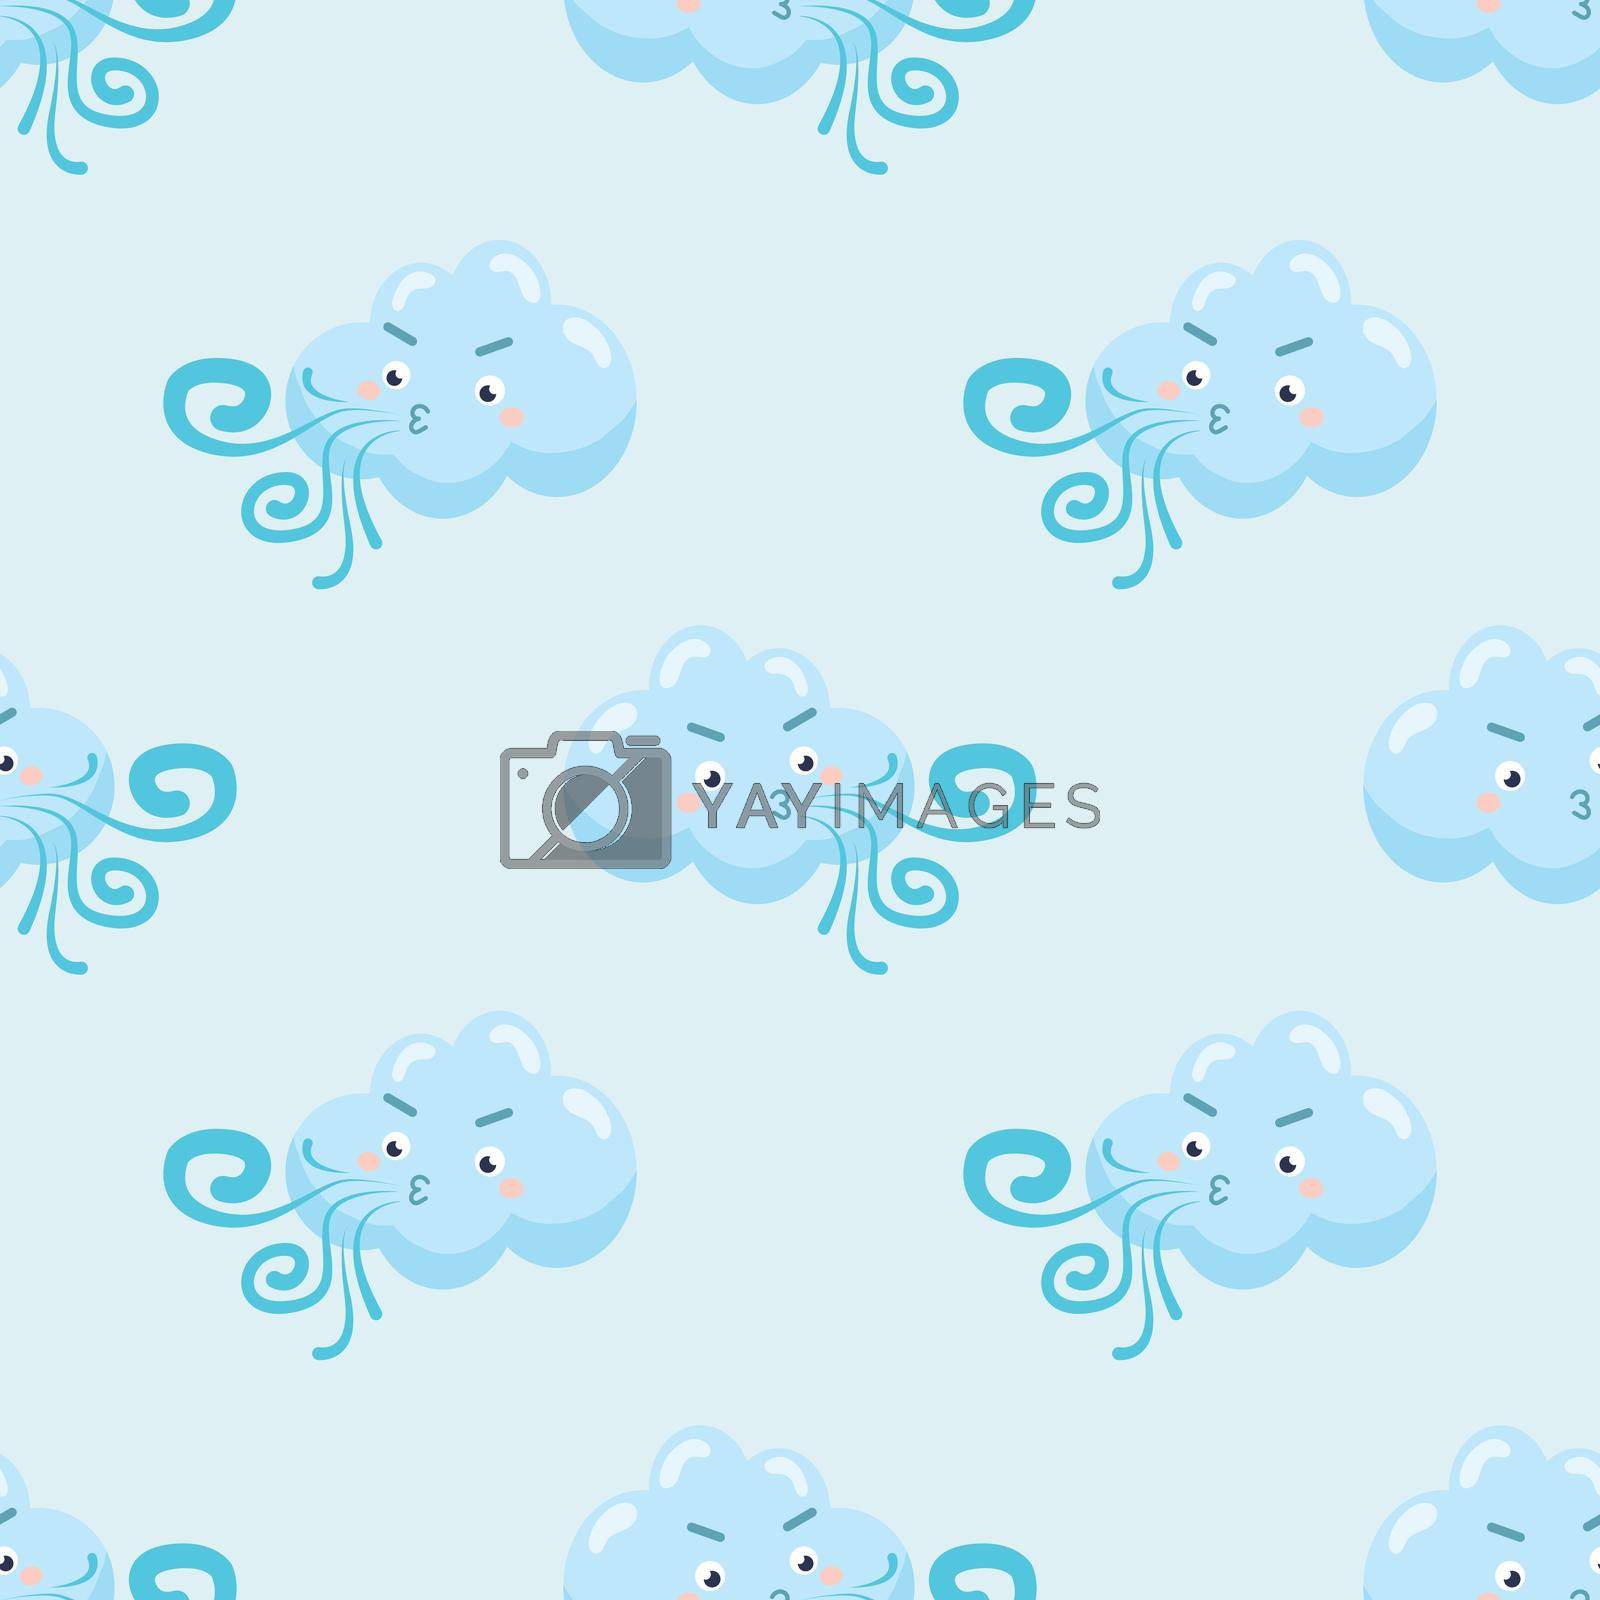 Royalty free image of Seamless cloud and wind cartoon pattern by valueinvestor